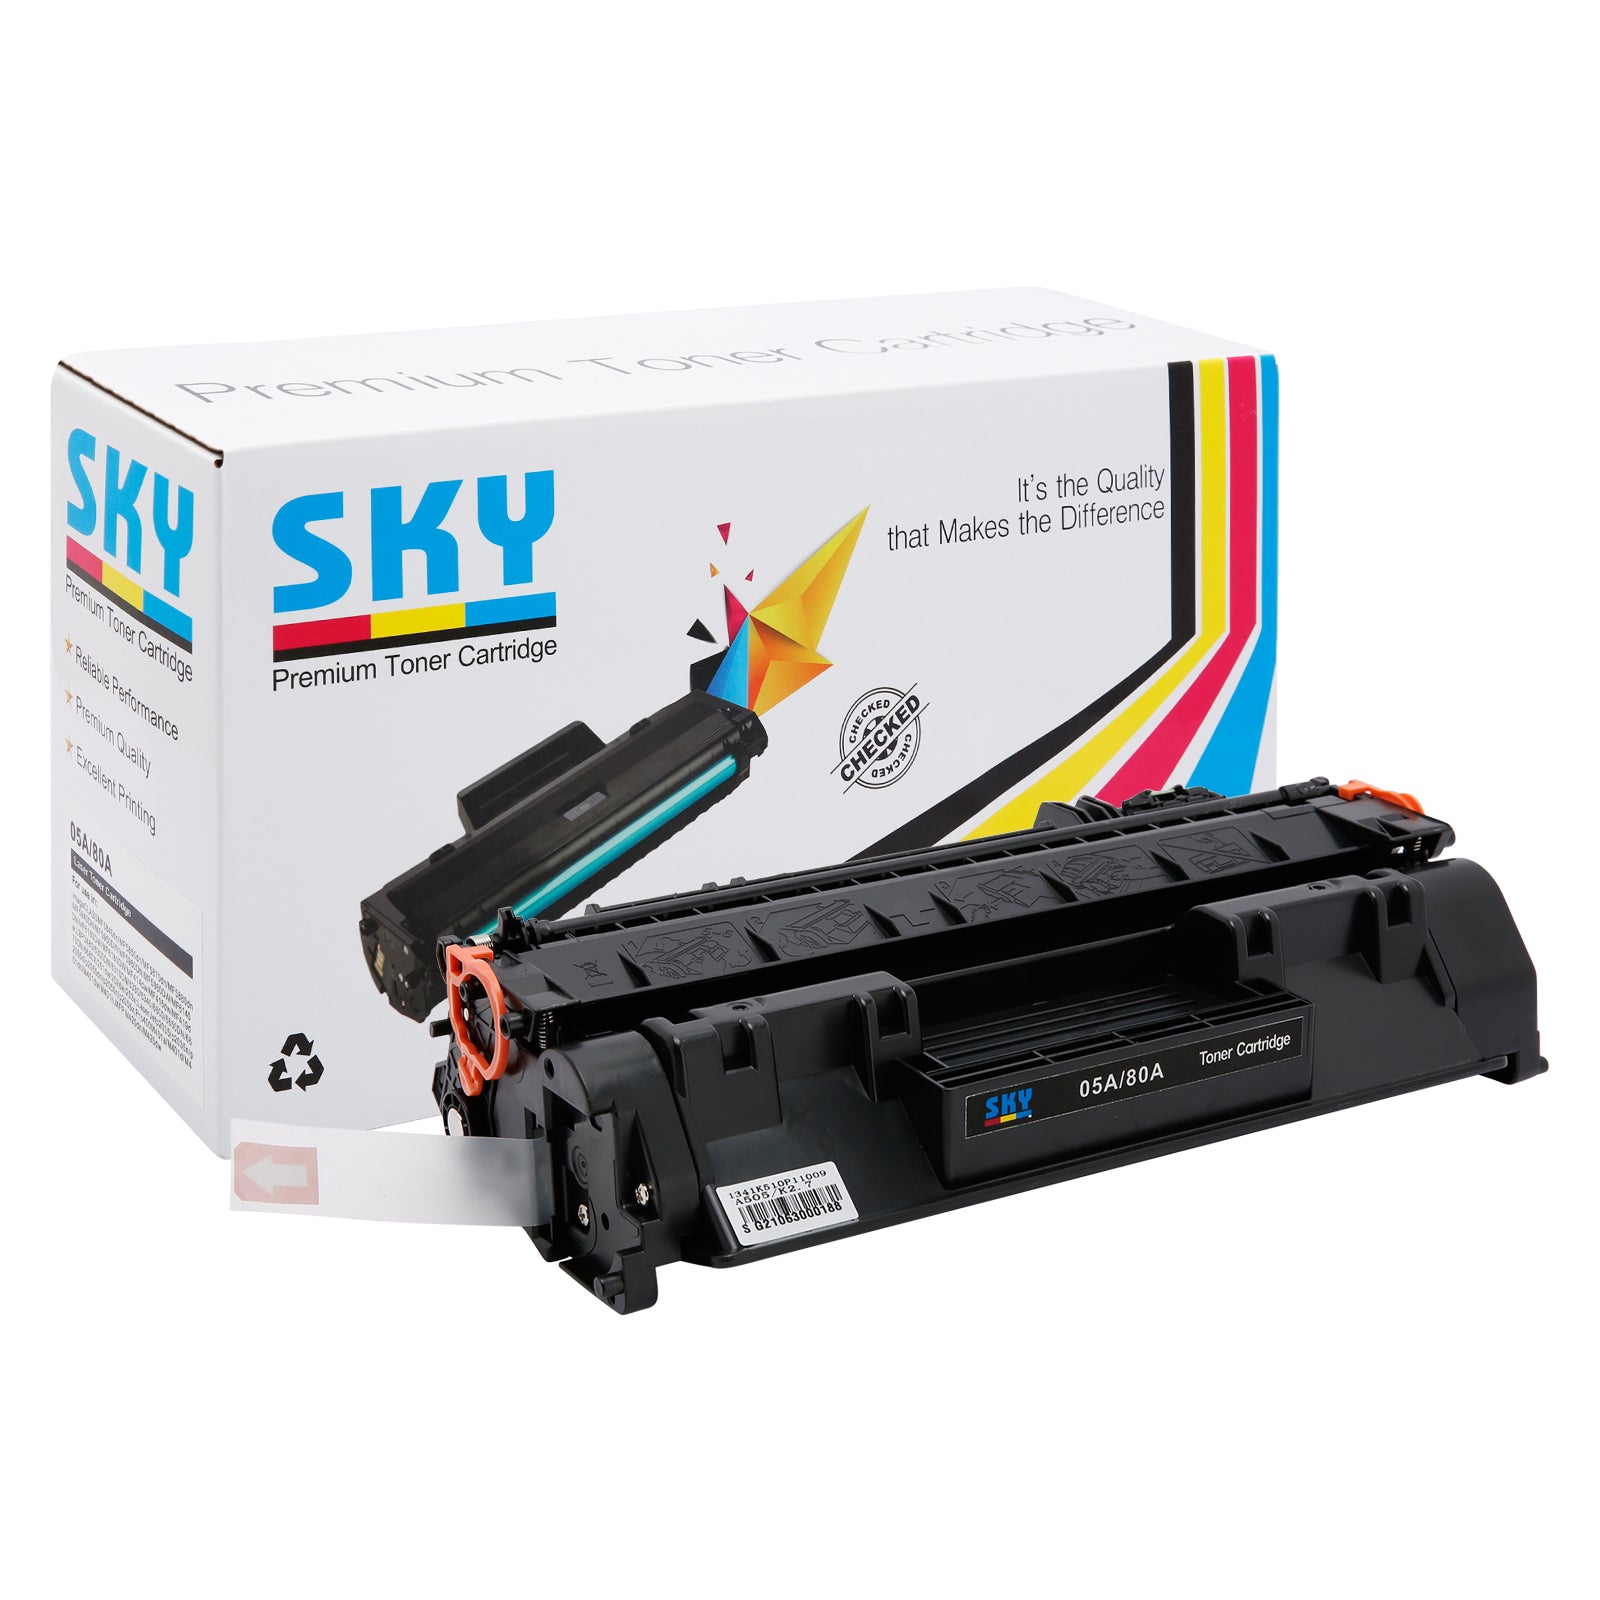 SKY  05A Toner Cartridge CE505A for HP LaserJet P2030 P2035 P2050 and P2055  Printers